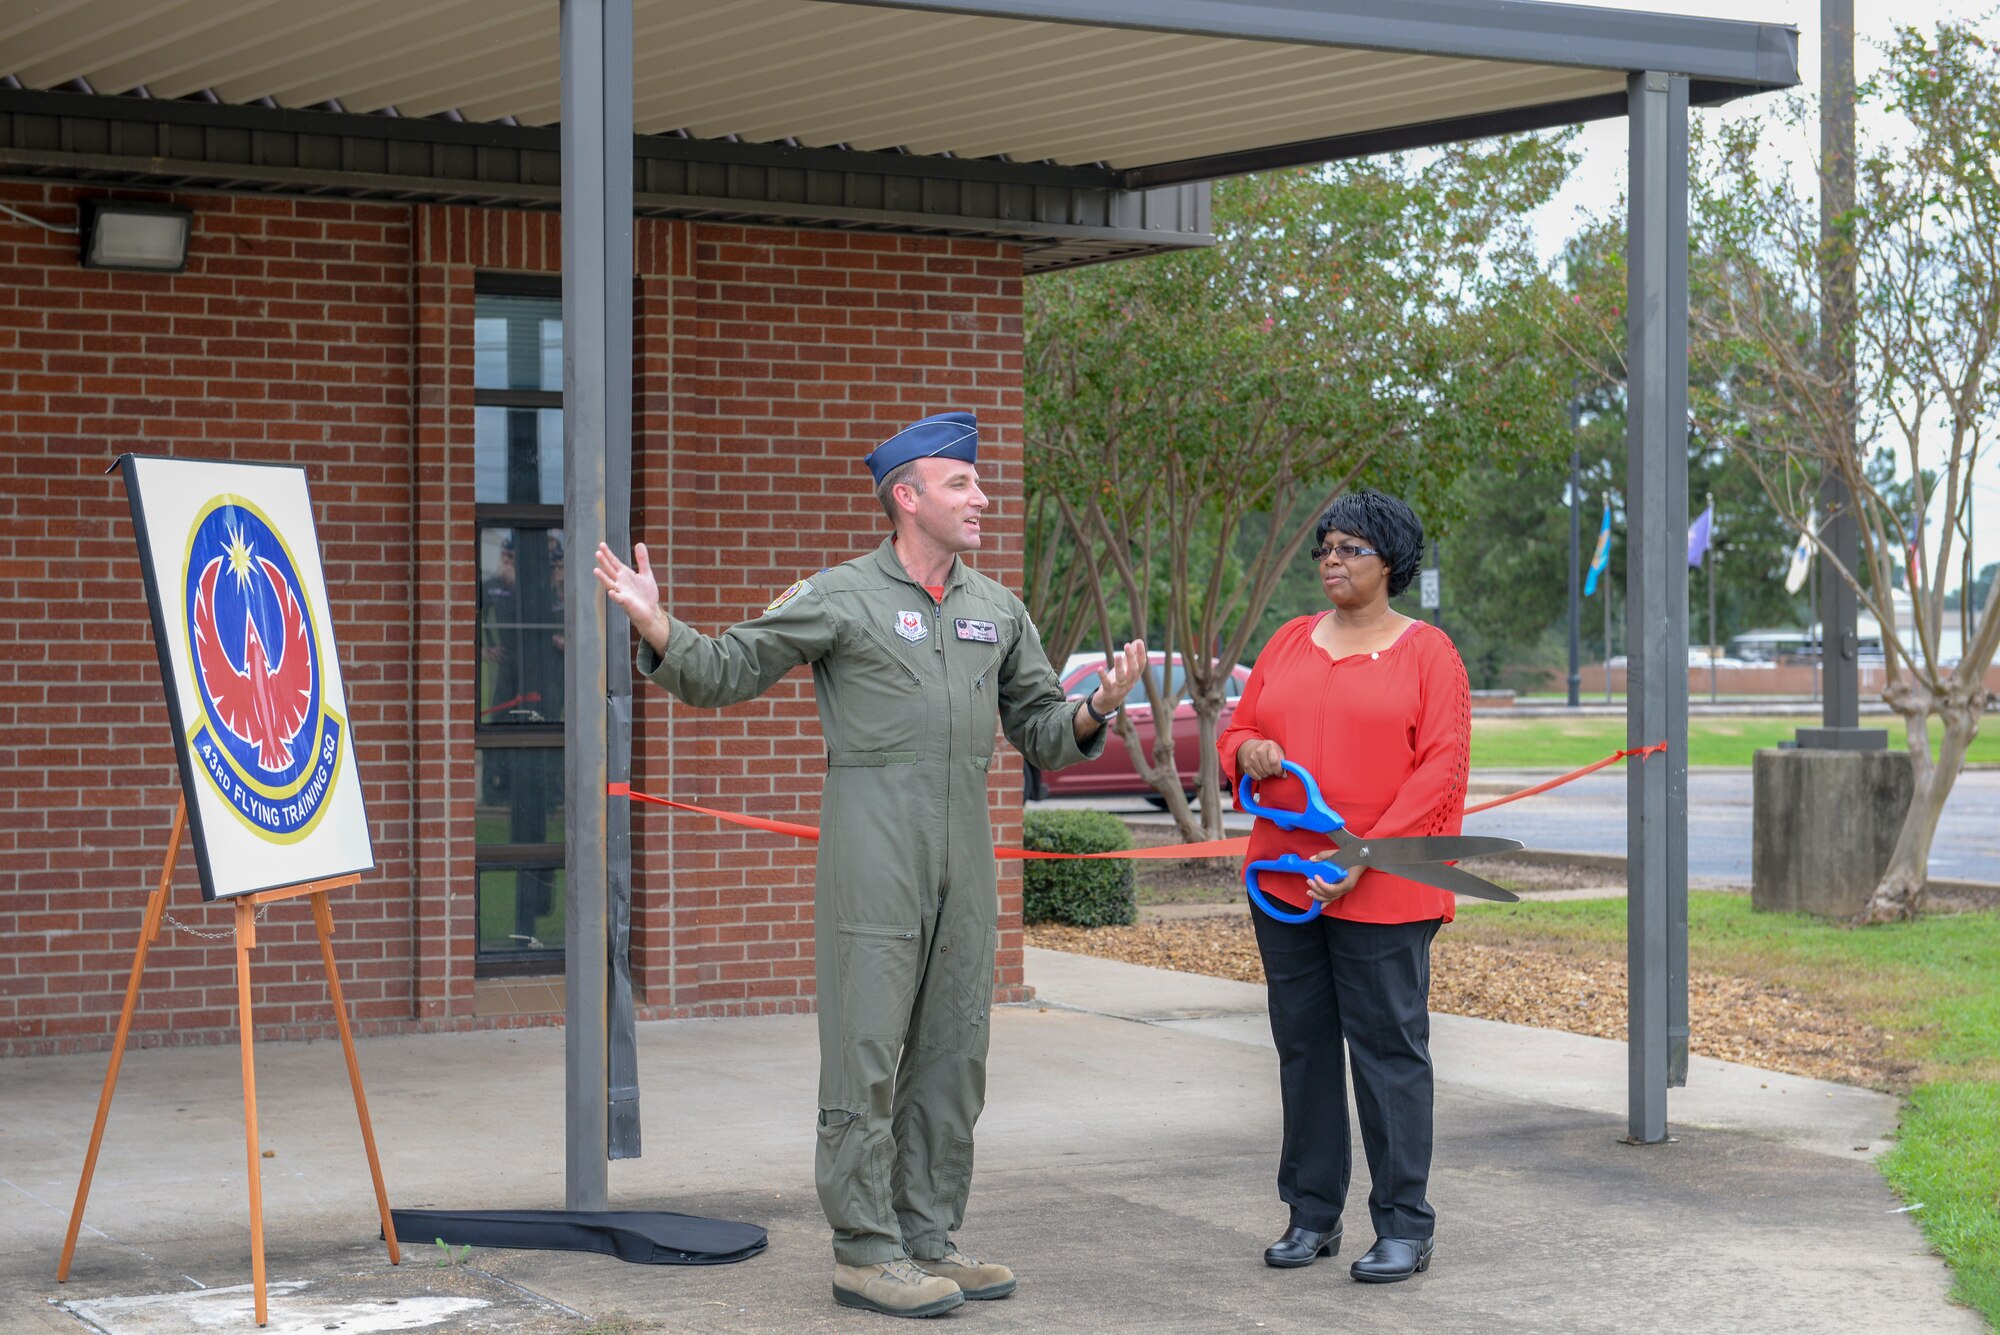 Lt. Col. Tom McElhinney, 43rd Flying Training Squadron commander, and Elaine Hobson, former 43rd Flying Training Squadron secretary welcomes attendees during the dedication ceremony for the squadron’s new building Sept. 28, 2018, on Columbus Air Force Base, Mississippi. Hobson recently retired after 17 years of civil service.  (U.S. Air Force photo by Airman Hannah Bean)